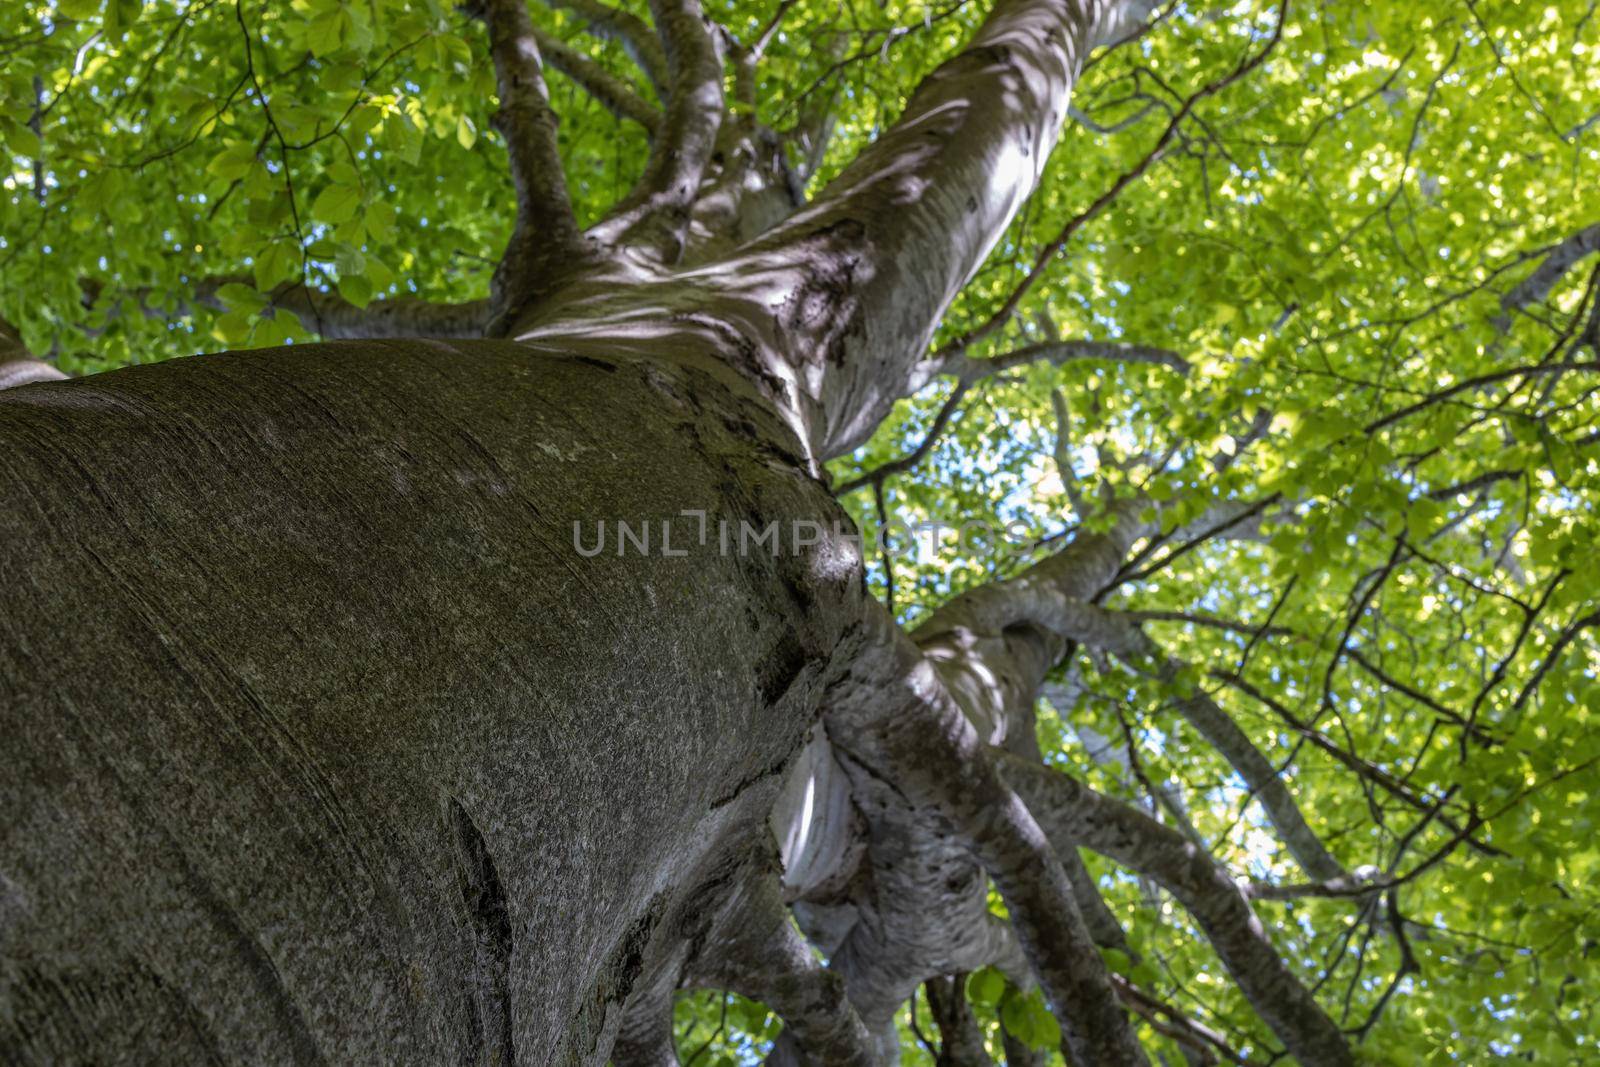 Bottom view, along the trunk, of the fresh green foliage of a beech tree in the spring